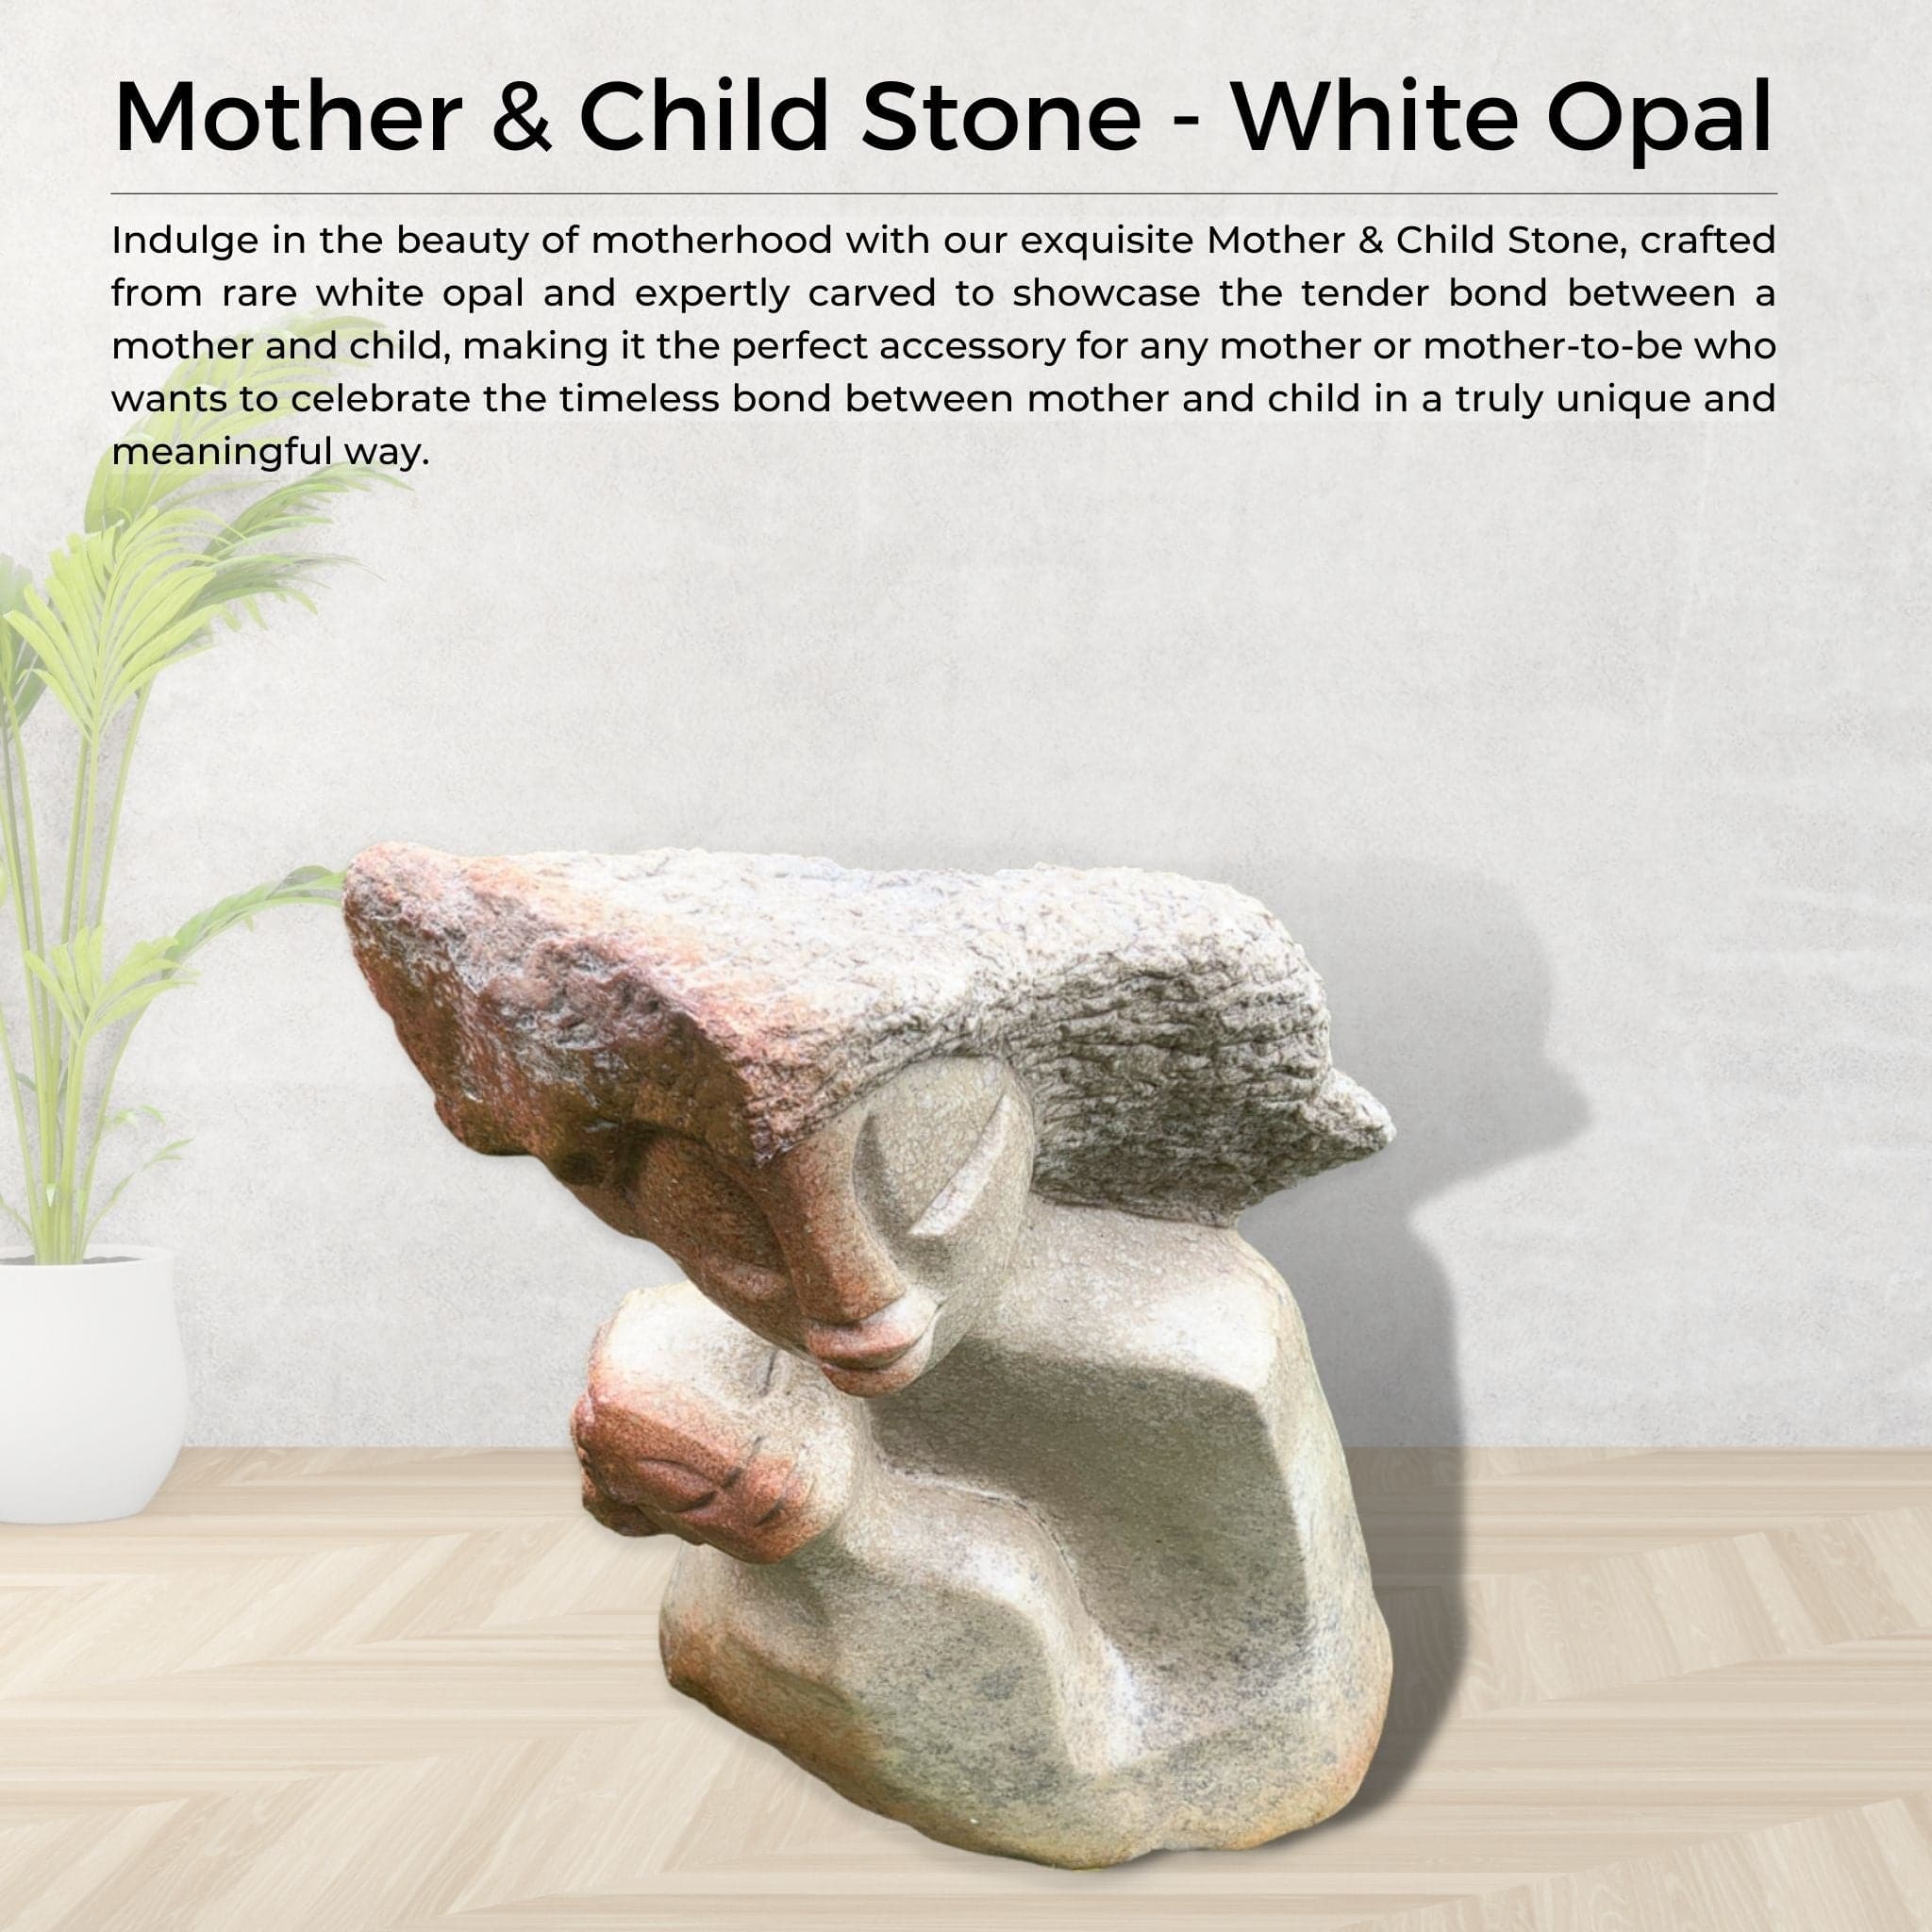 Mother & Child Stone - White Opal - Pangea Sculptures